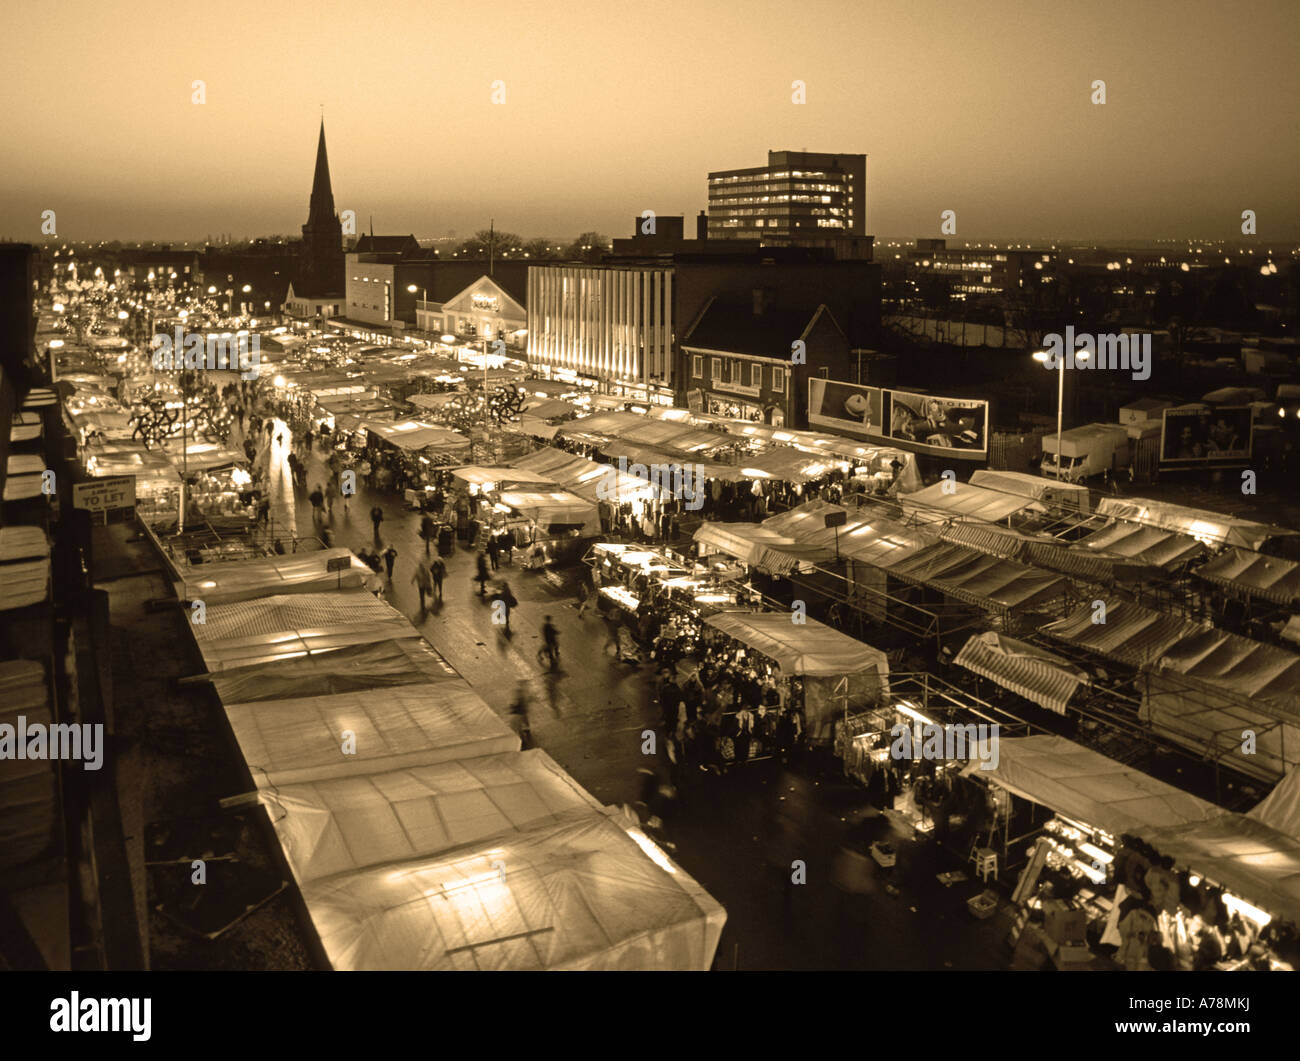 Historical aerial birds eye winter view looking down on urban landscape stalls & shoppers in Romford market place church spire  East London UK Stock Photo